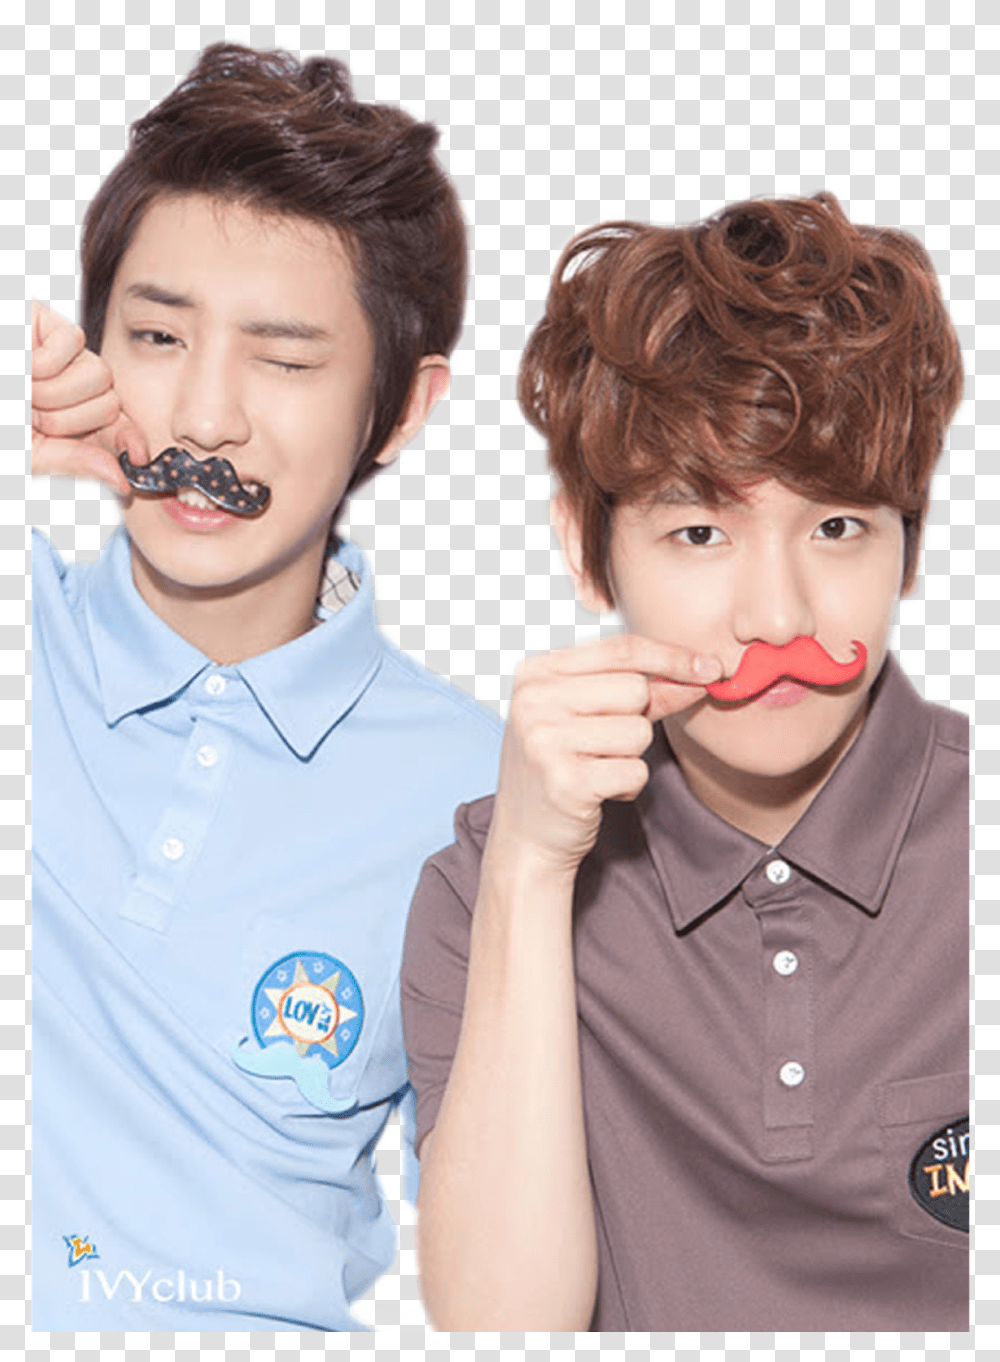 Do Not Claim These Pngs As Yours Exo Chanyeol Baek Hyun, Person, Human, Face, Finger Transparent Png